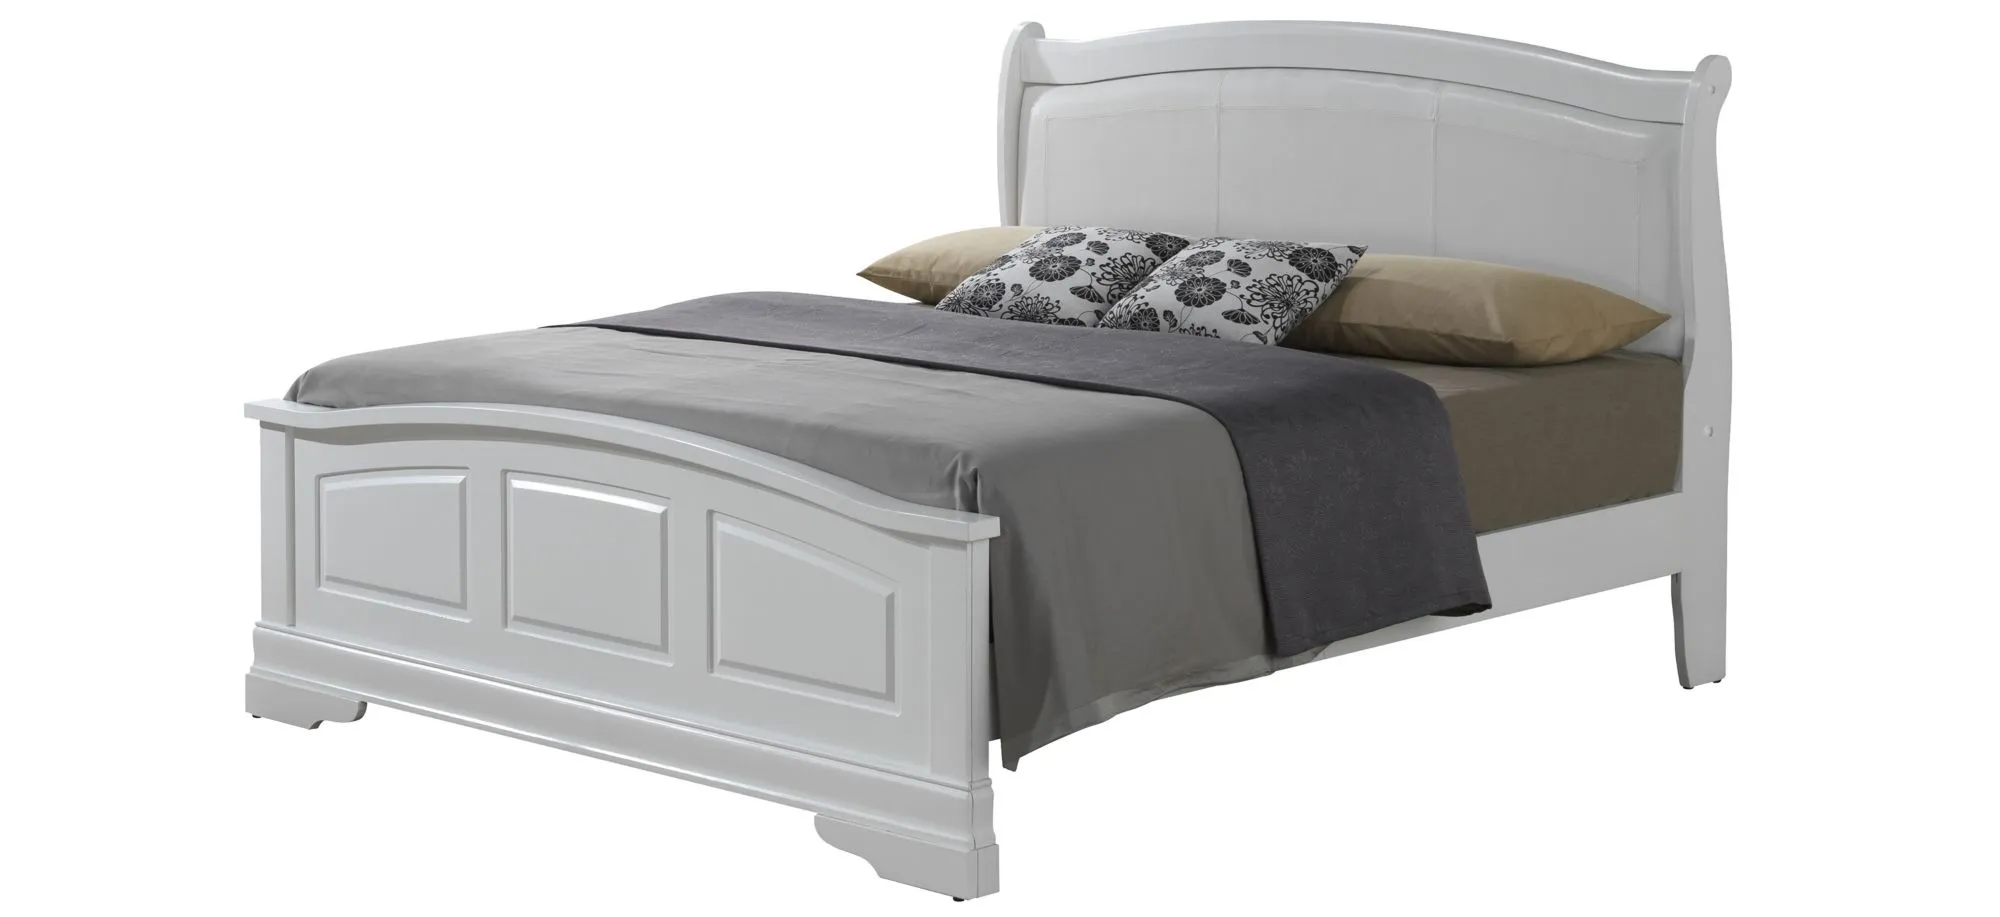 Rossie Upholstered Panel Bed in White by Glory Furniture